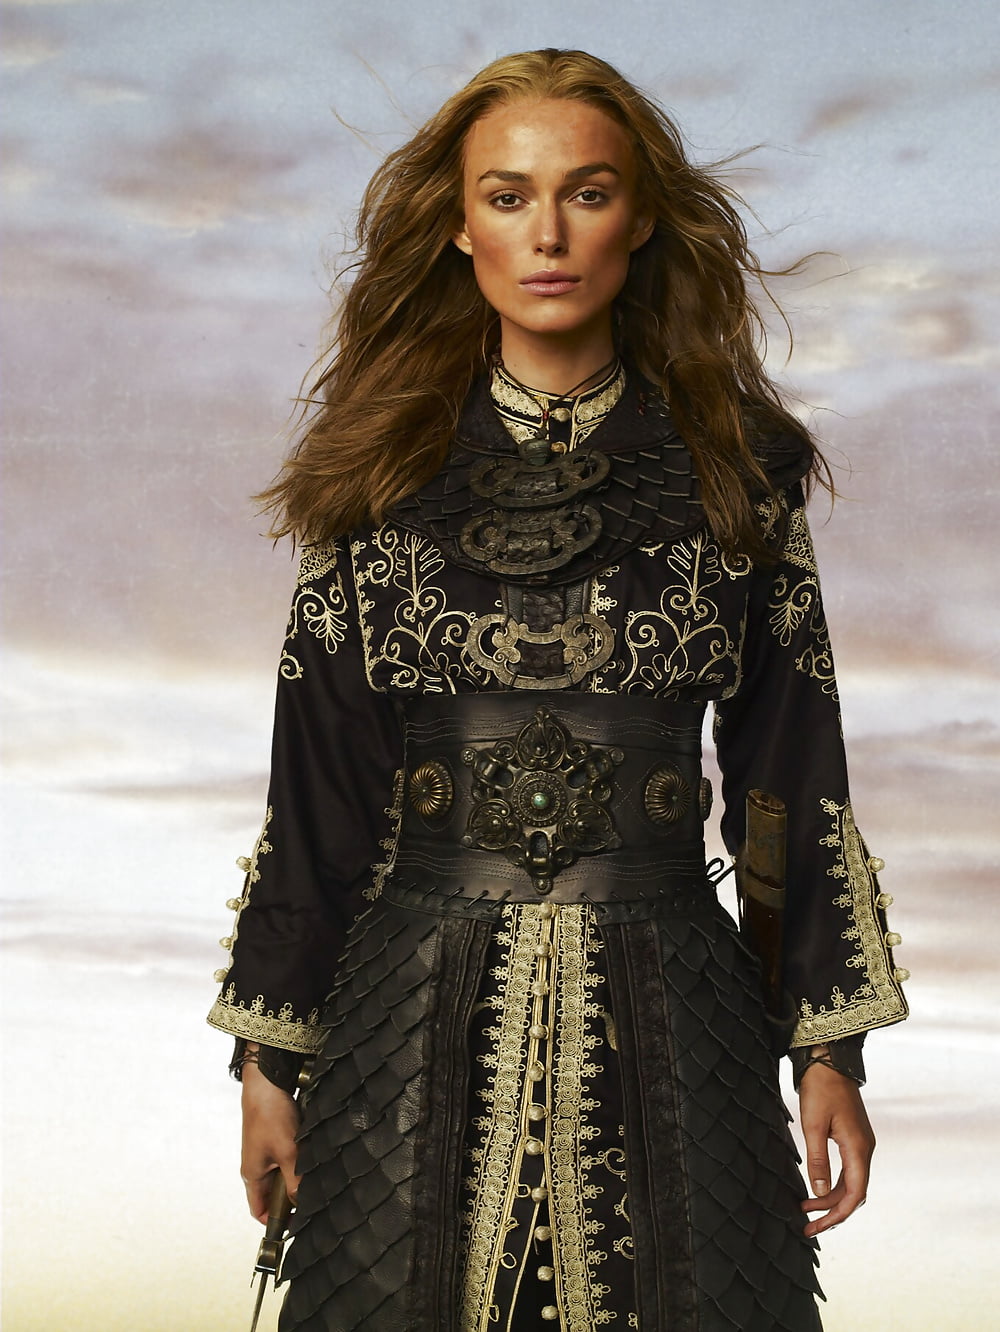 Keira_Knightley_POTC_At_Worlds_End_promoshoot_ 2007 (4/26)